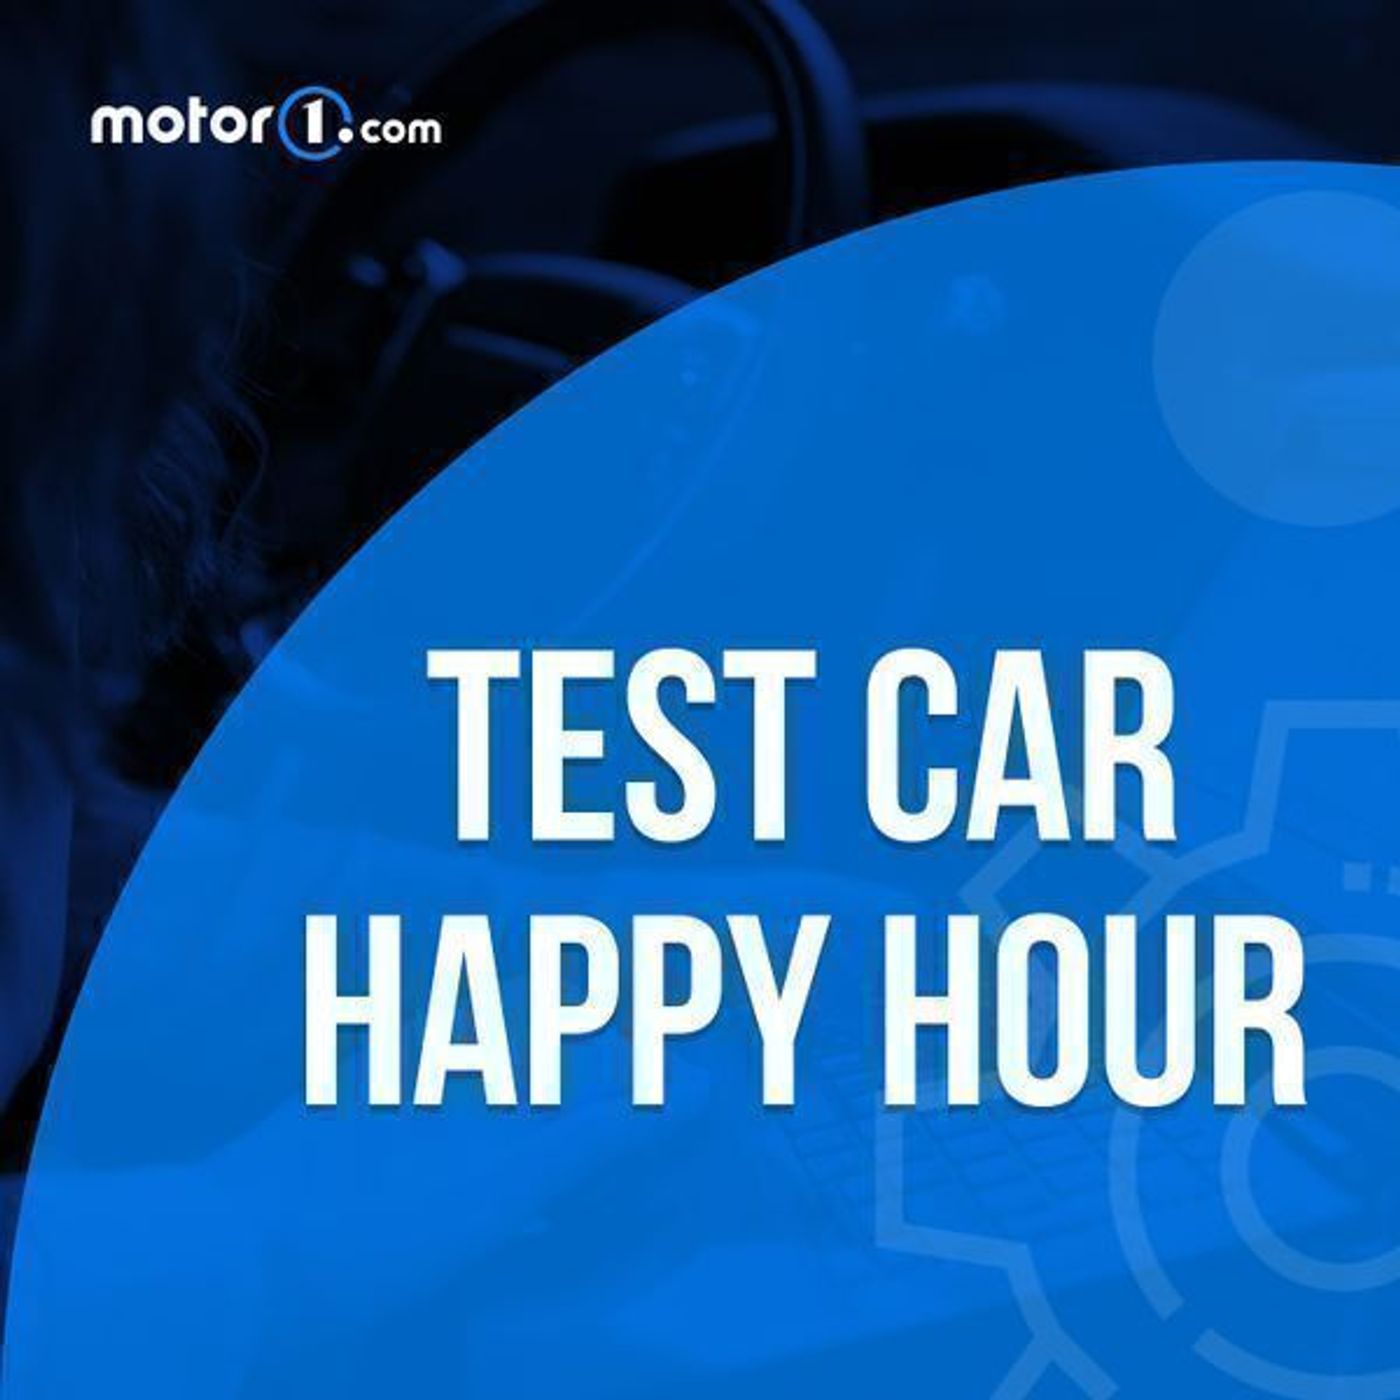 S1 Ep53: Motor1 Test Car Happy Hour #53: GR Corolla, Lucid Air Sapphire, Tonale, Elantra, Supercars for Dads